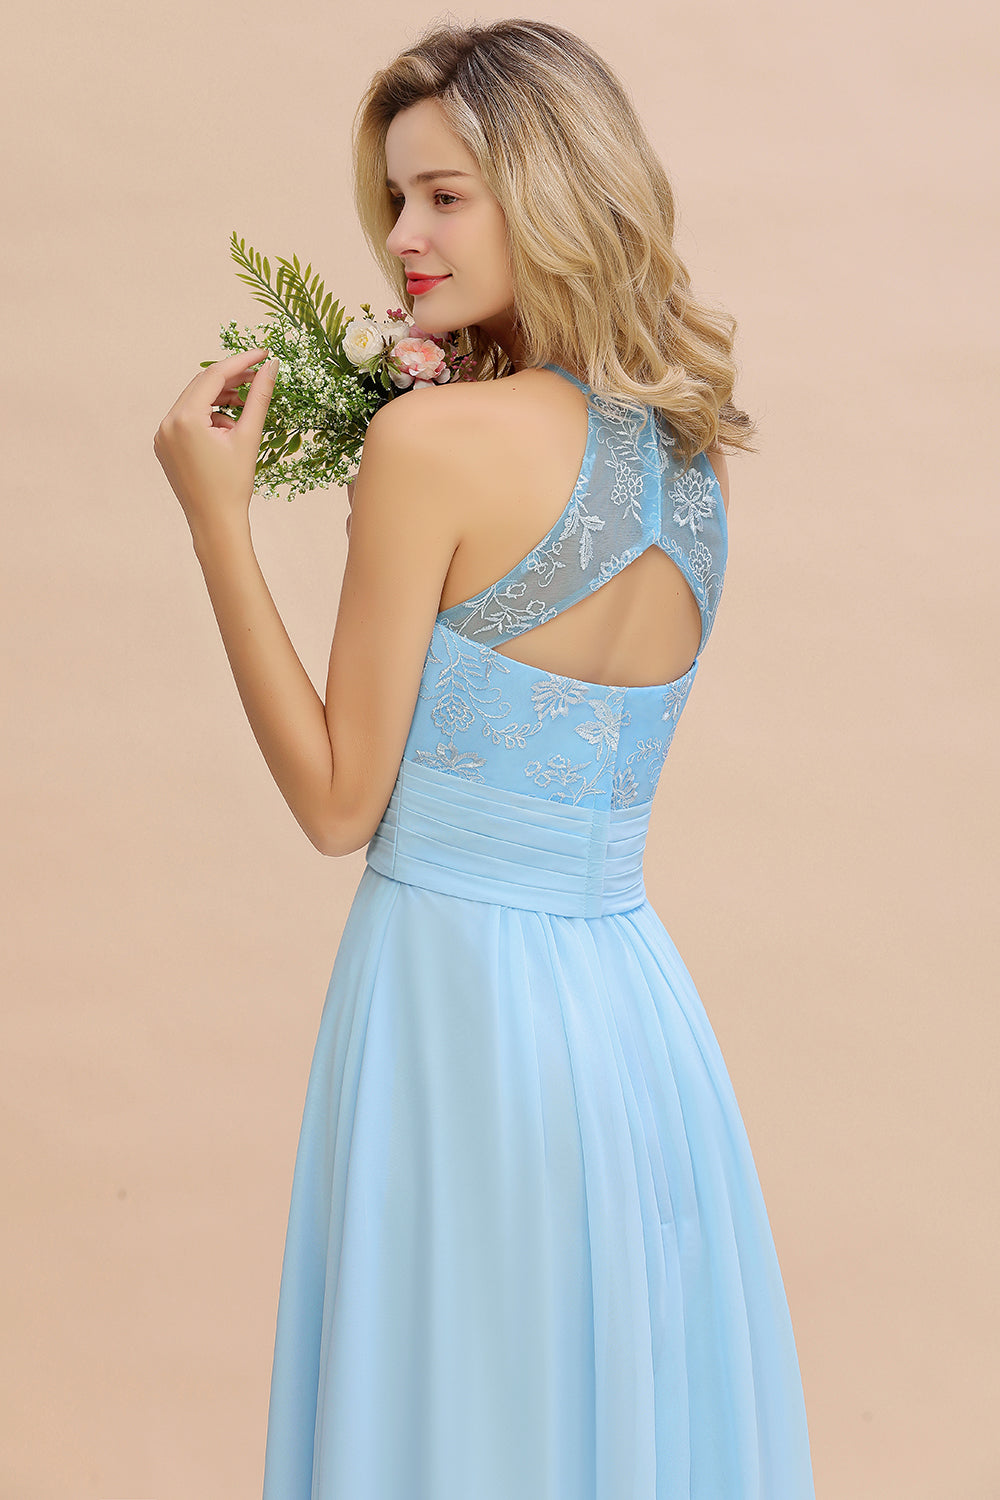 Load image into Gallery viewer, Elegant Jewel Ruffle Affordable Chiffon Bridesmaid Dress with Appliques-27dress
